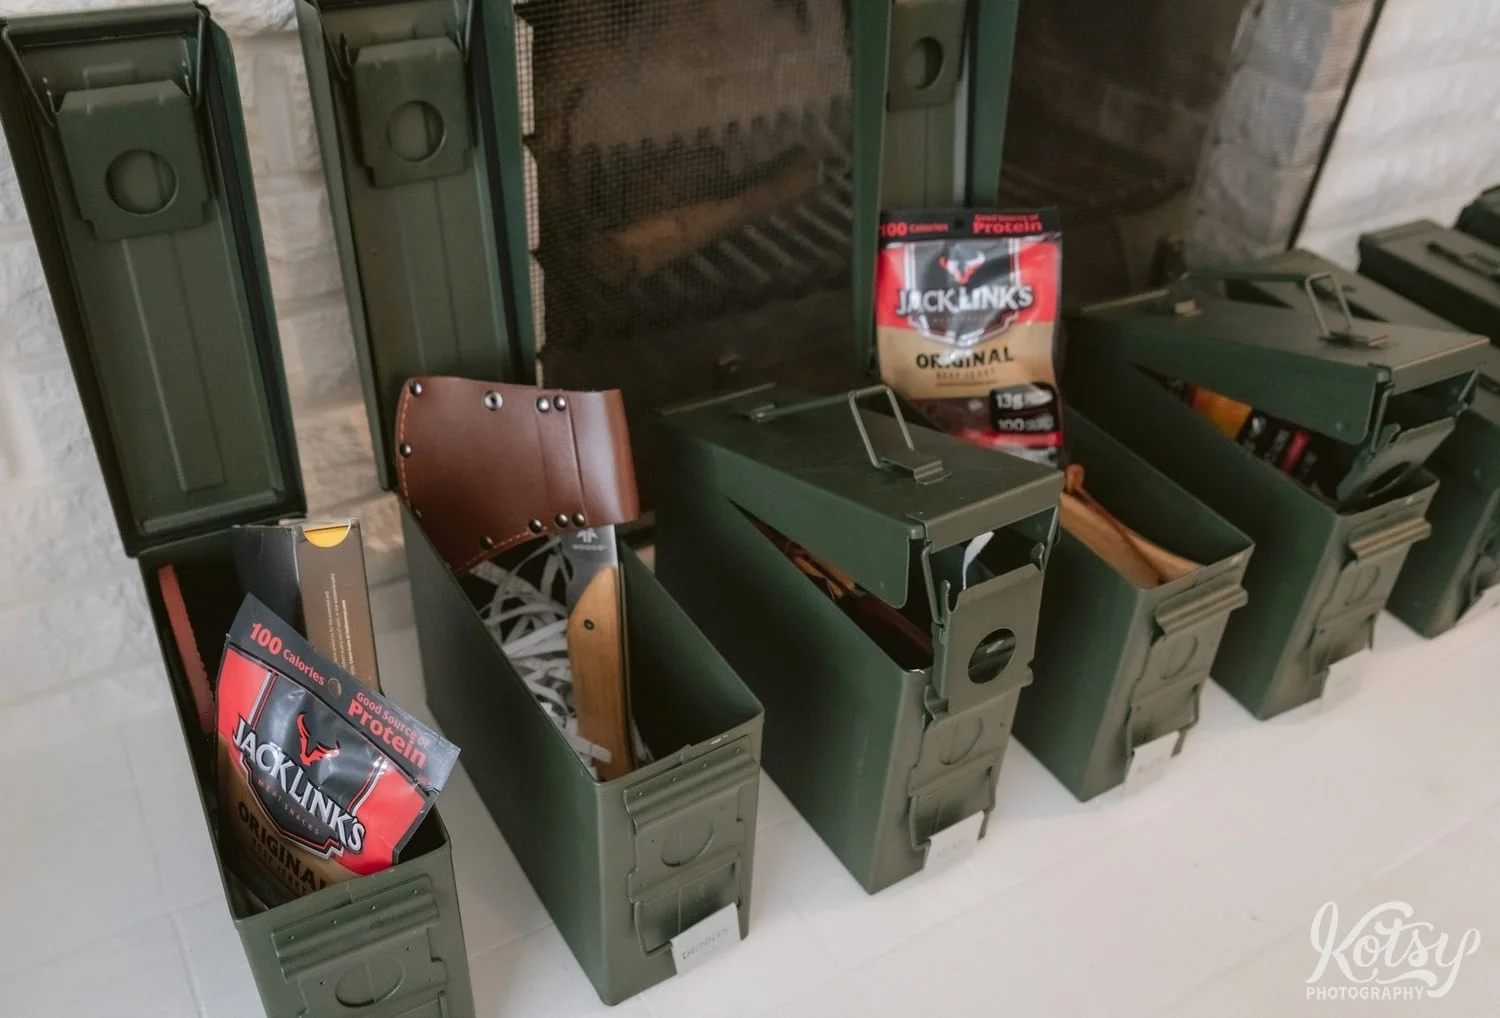 A row of ammo cans are seen with items like beef jerky and an ax as groomsmen gifts